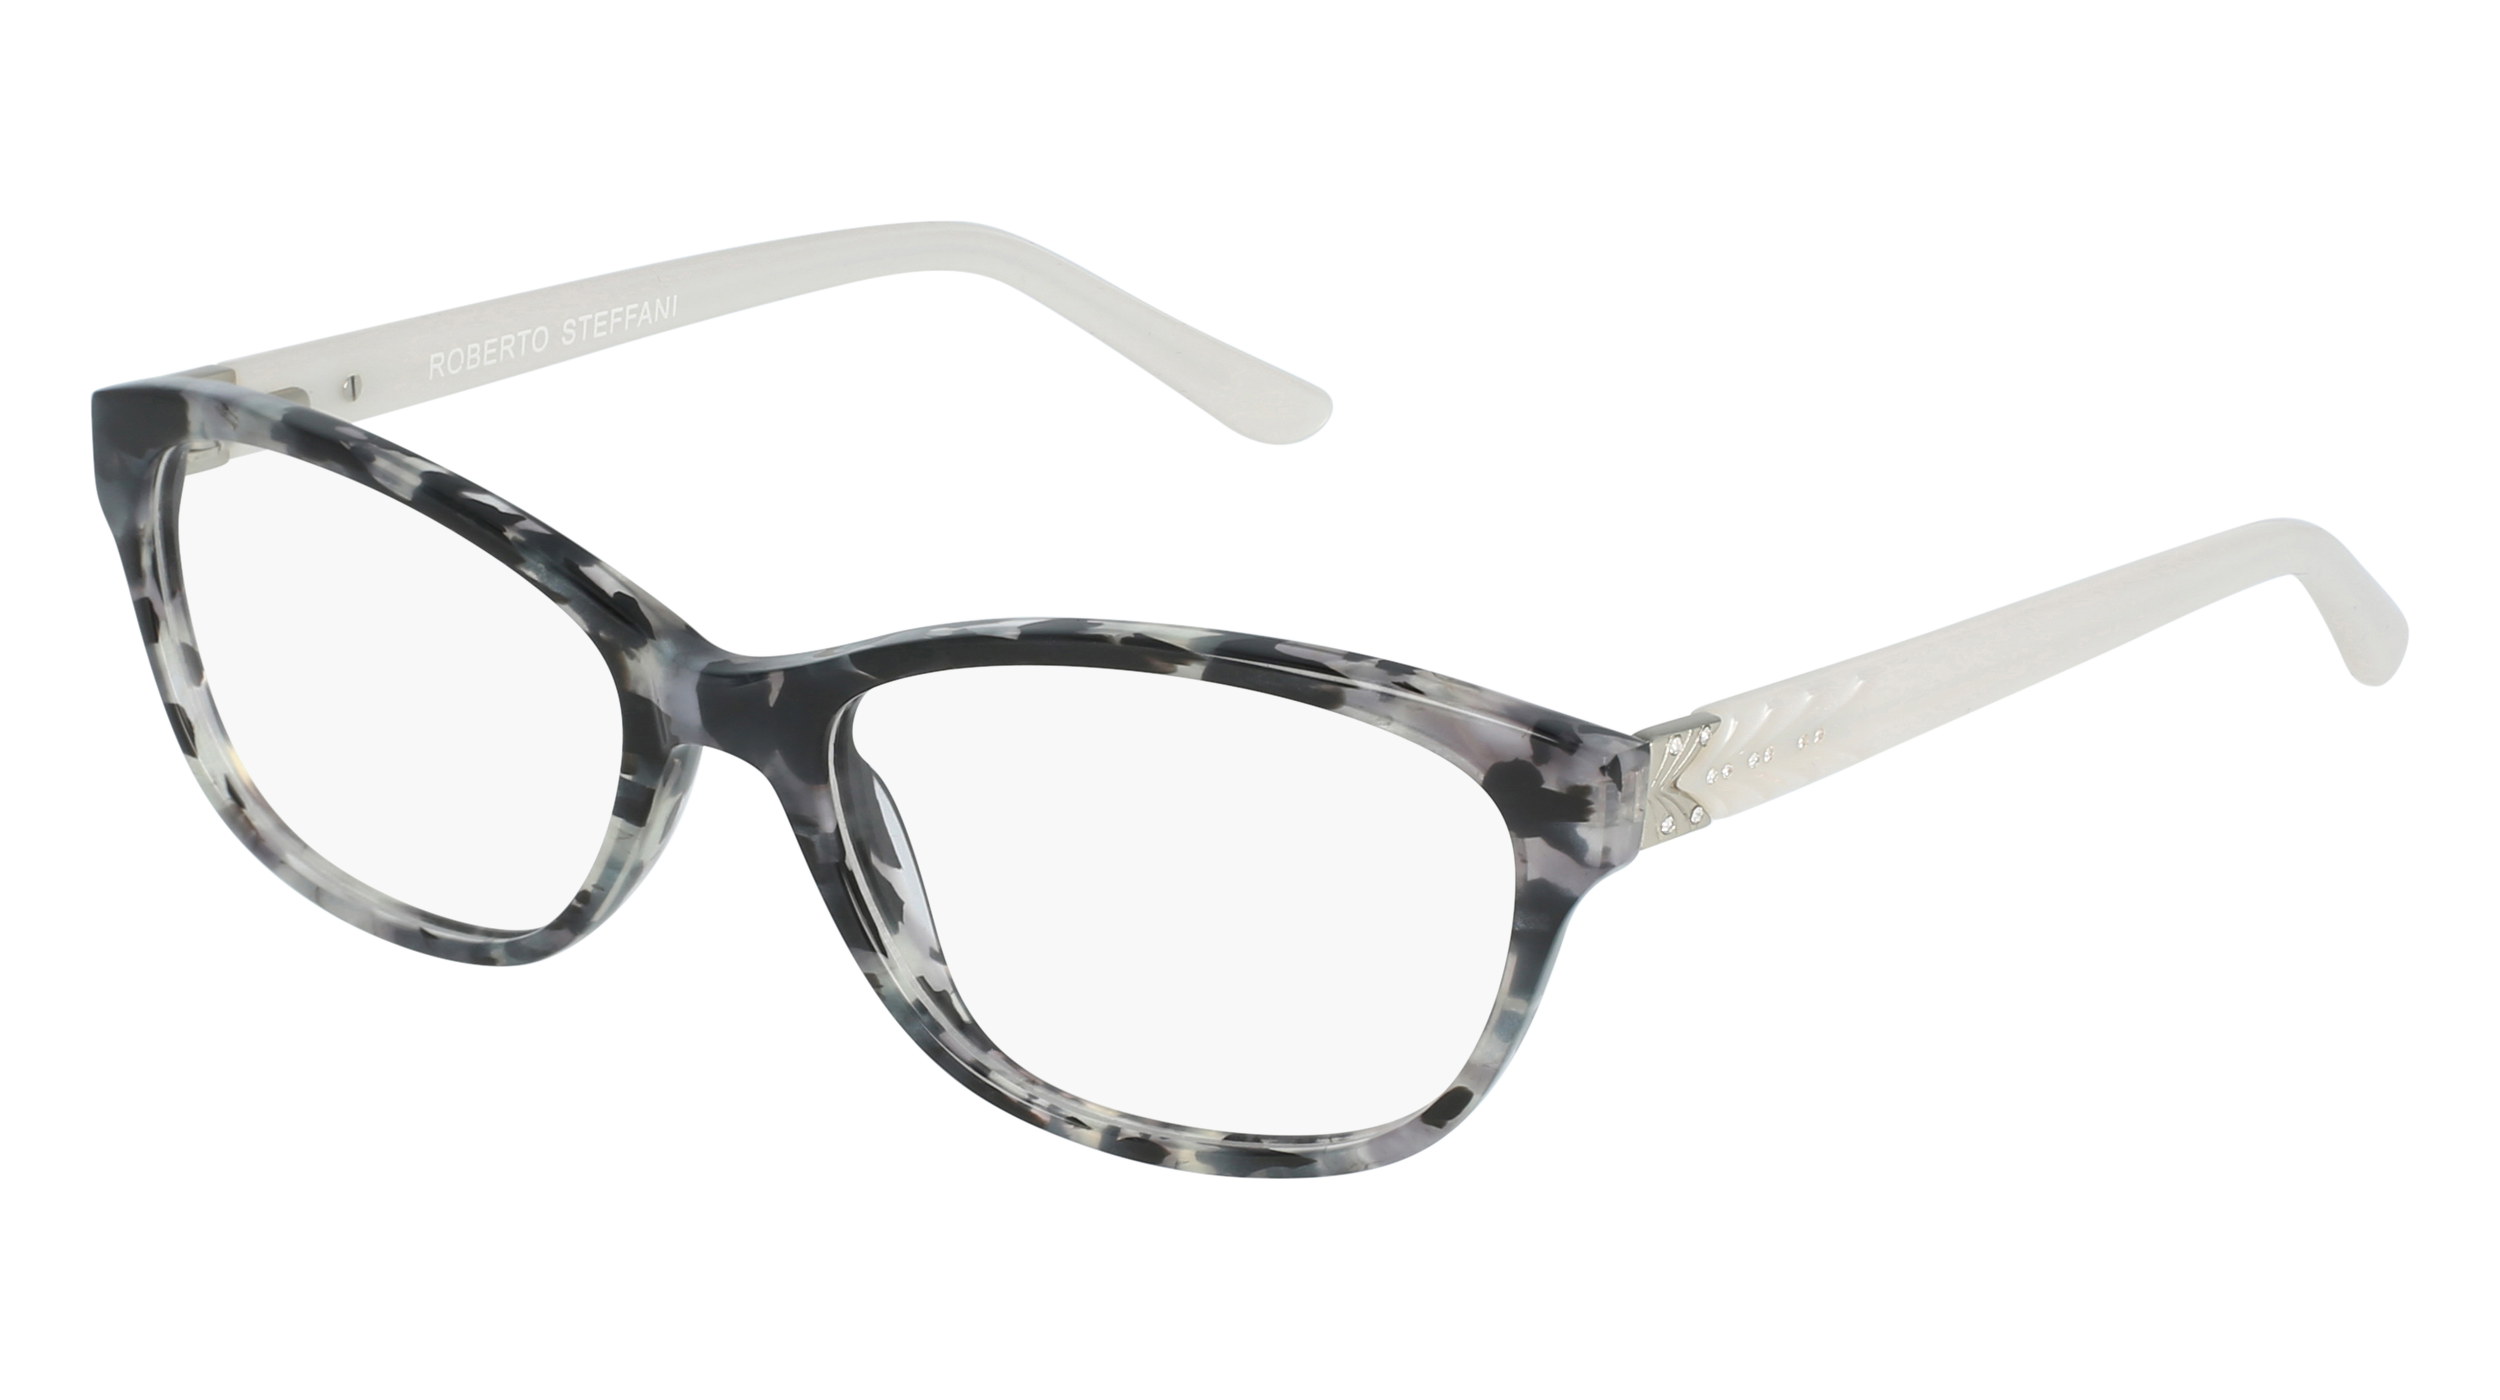 R RS 165 women's eyeglasses (from the side)